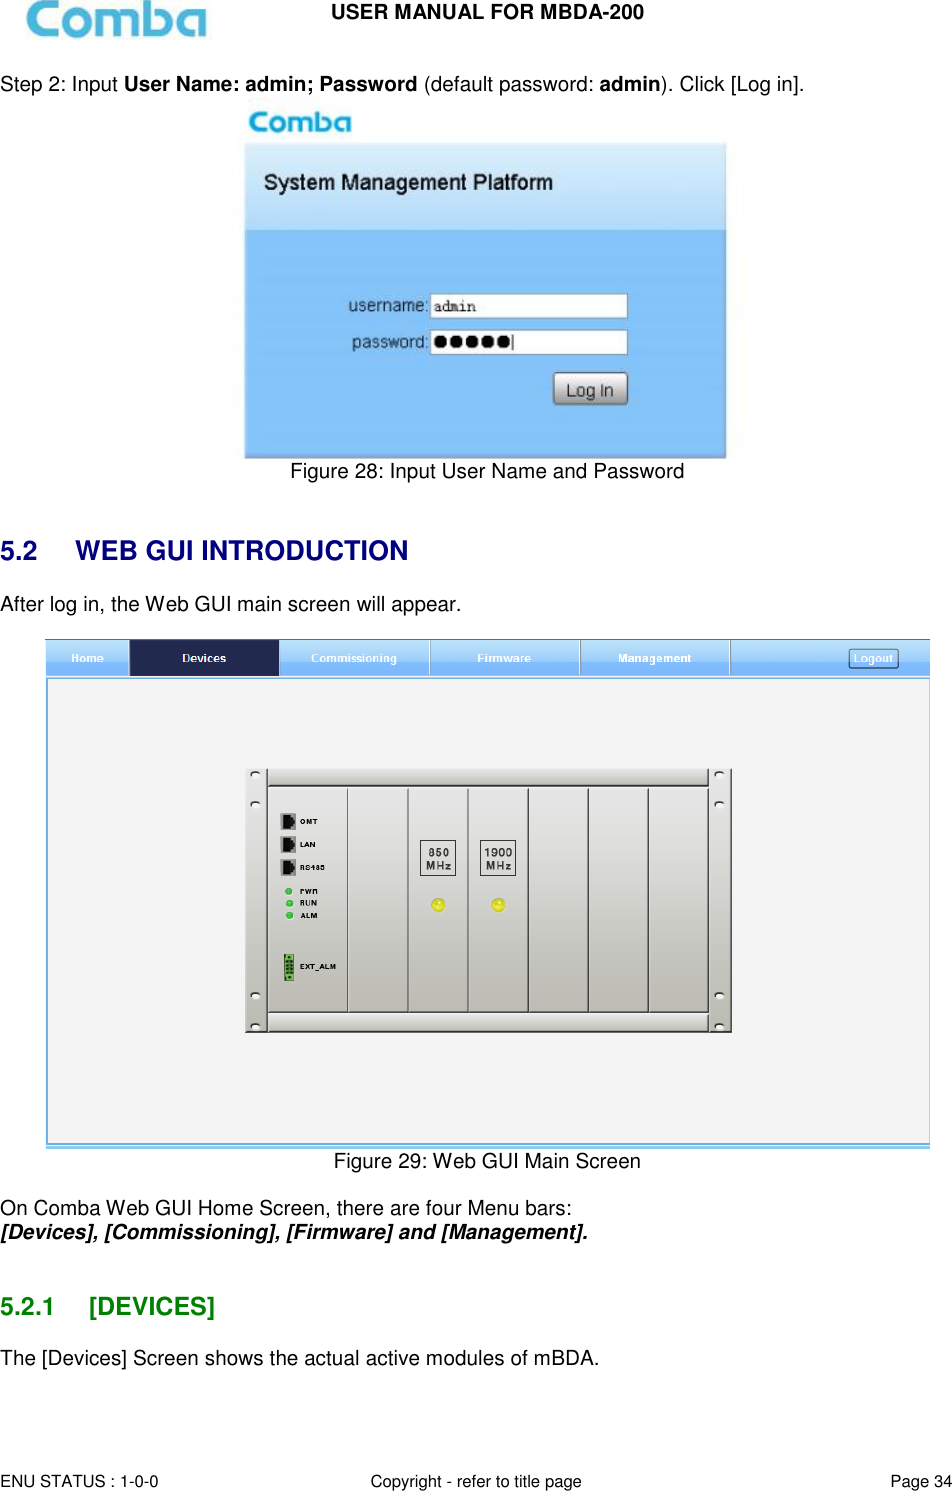 USER MANUAL FOR MBDA-200  ENU STATUS : 1-0-0 Copyright - refer to title page Page 34     Step 2: Input User Name: admin; Password (default password: admin). Click [Log in].   Figure 28: Input User Name and Password   5.2  WEB GUI INTRODUCTION After log in, the Web GUI main screen will appear.   Figure 29: Web GUI Main Screen  On Comba Web GUI Home Screen, there are four Menu bars:  [Devices], [Commissioning], [Firmware] and [Management].   5.2.1  [DEVICES] The [Devices] Screen shows the actual active modules of mBDA.   